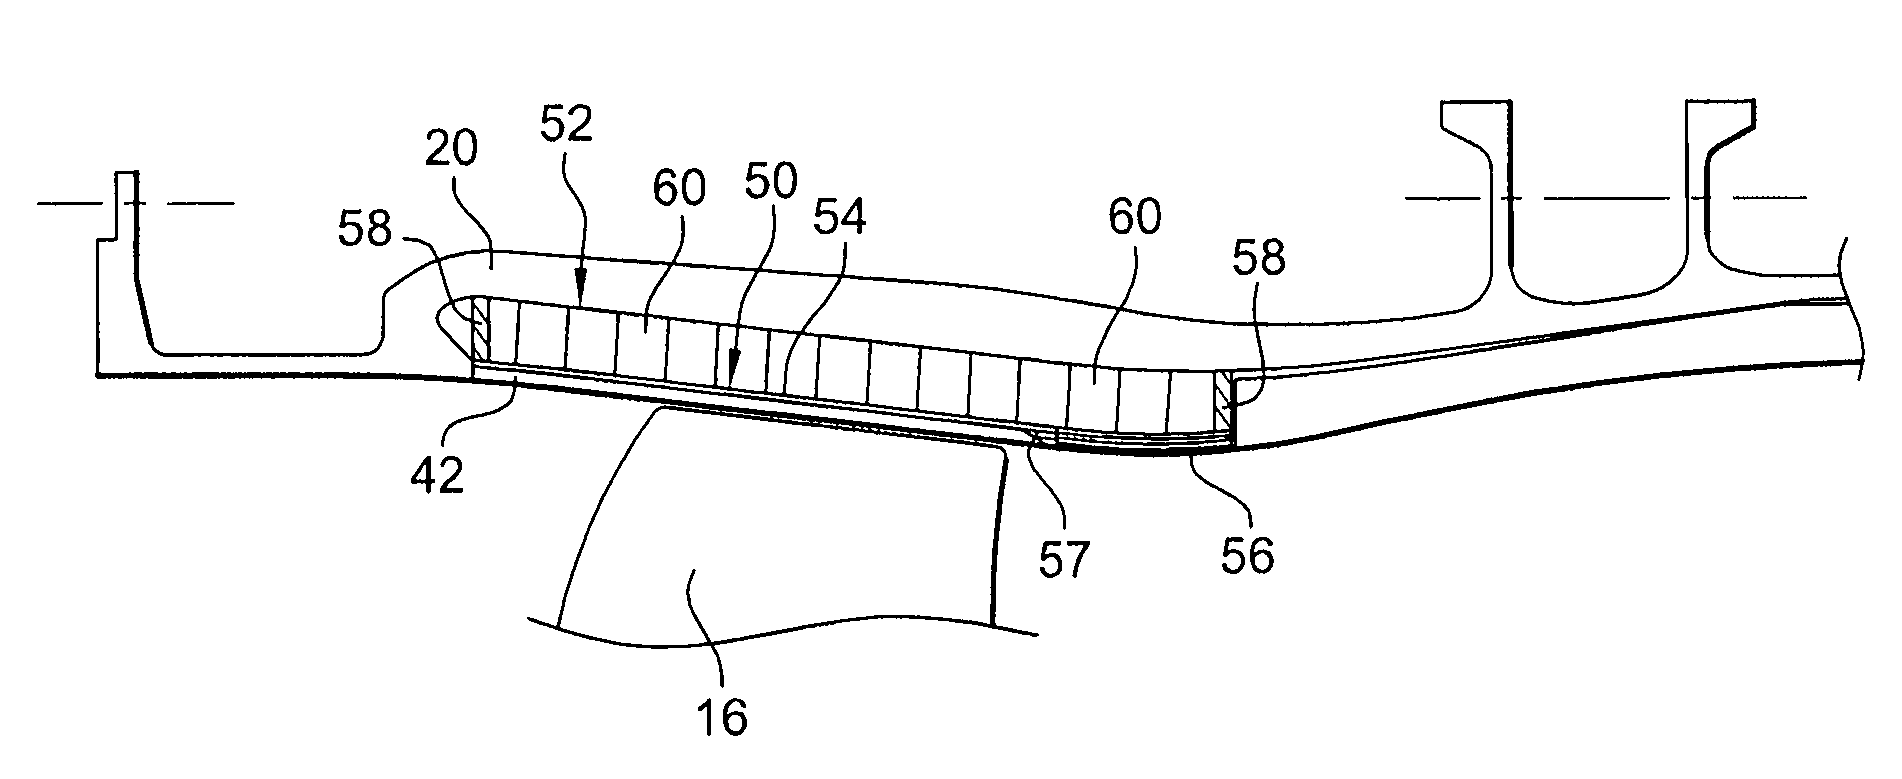 Panel for supporting abradable material in a turbomachine